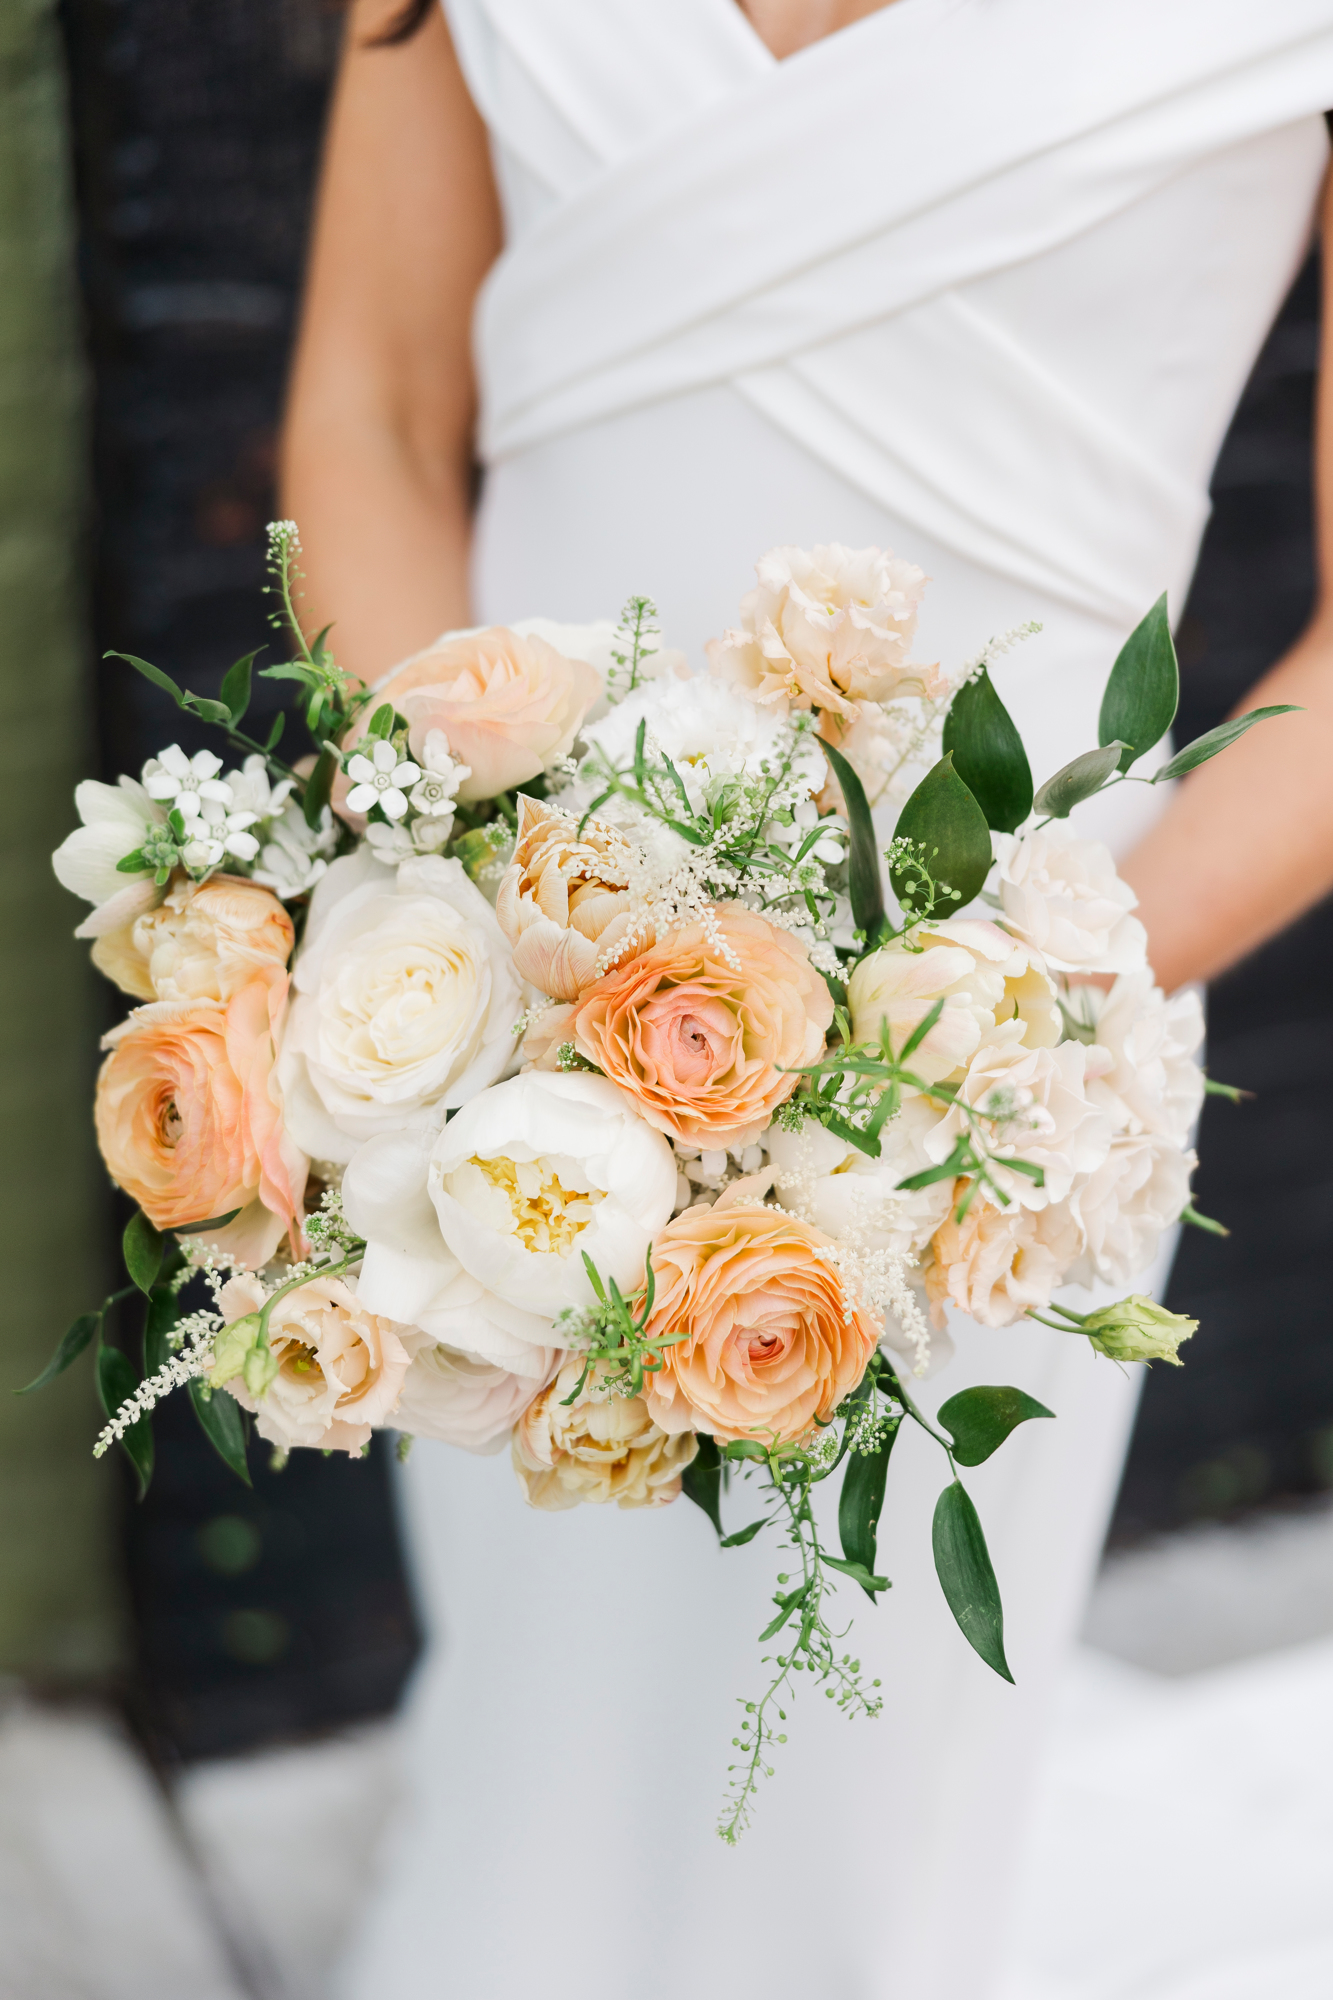 Cheerful Wedding at 501 Union in NYC